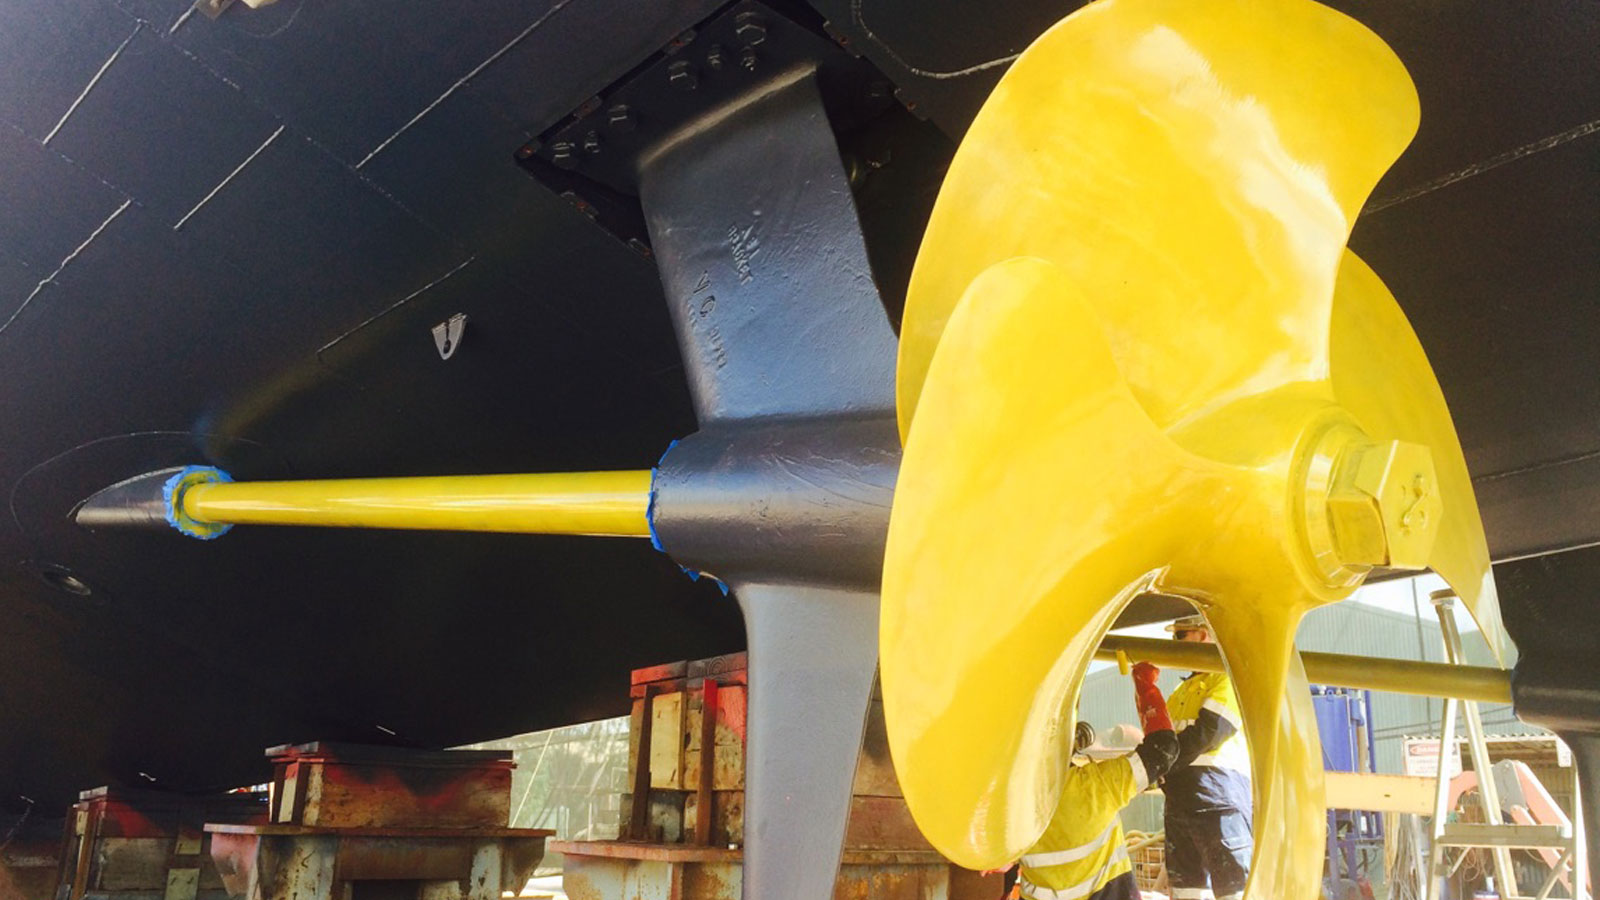 Te Mataili's propeller and shaft with Propspeed applied